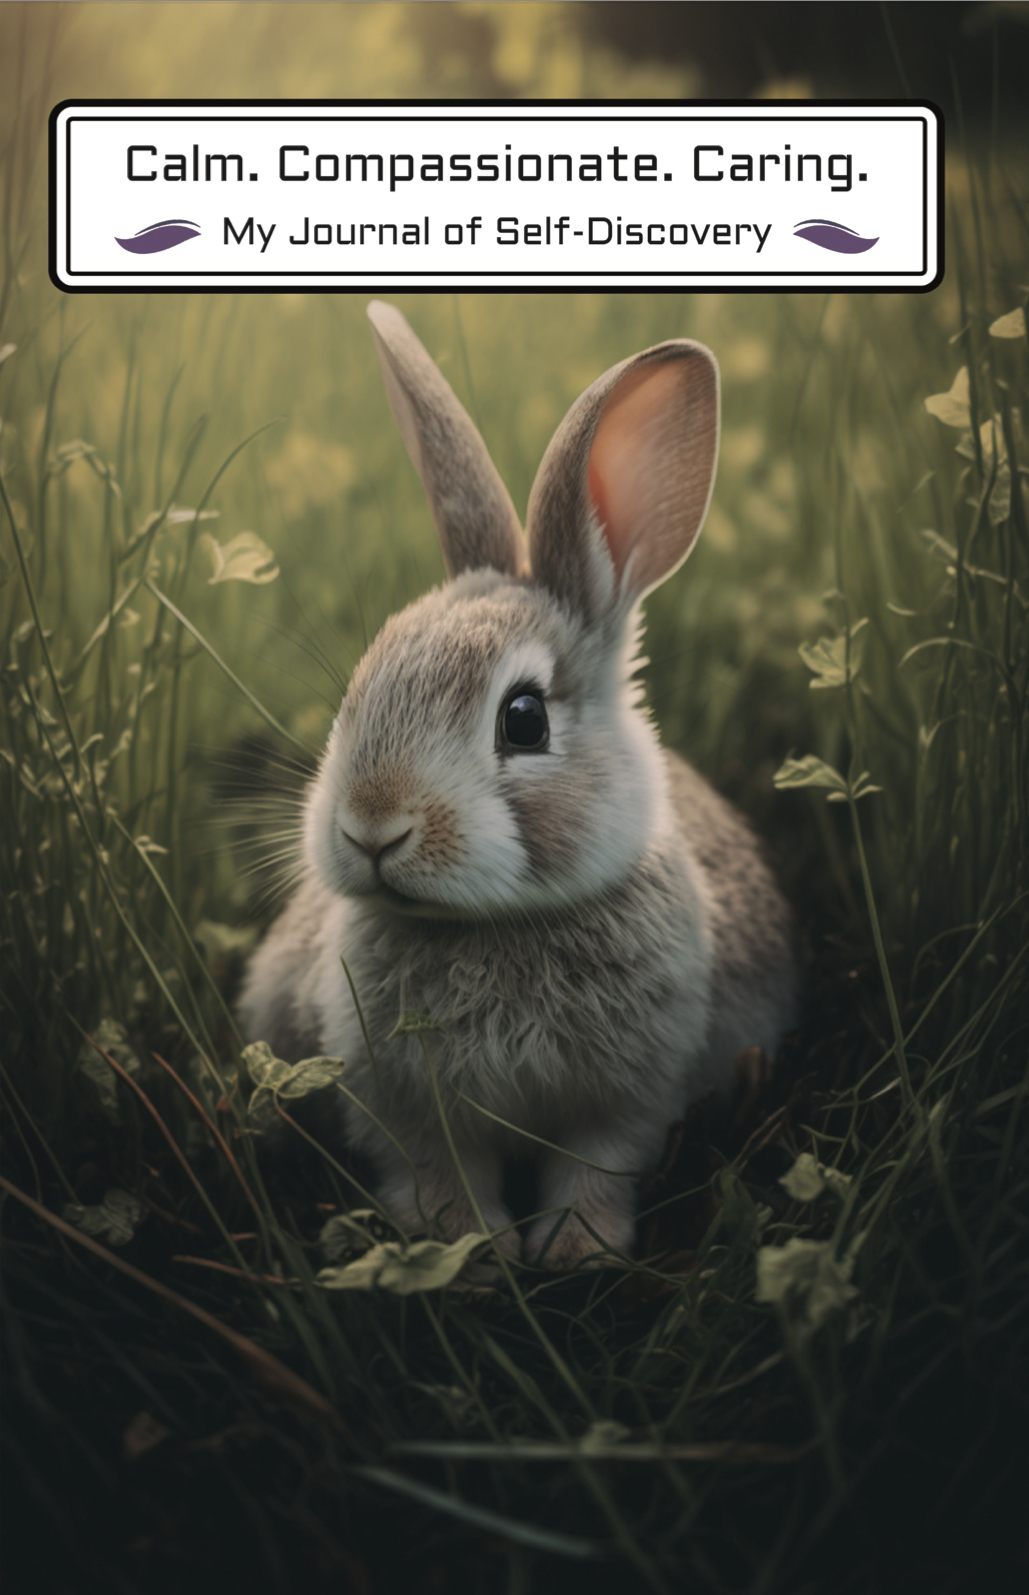 Image of a bunny on the front cover of this journal